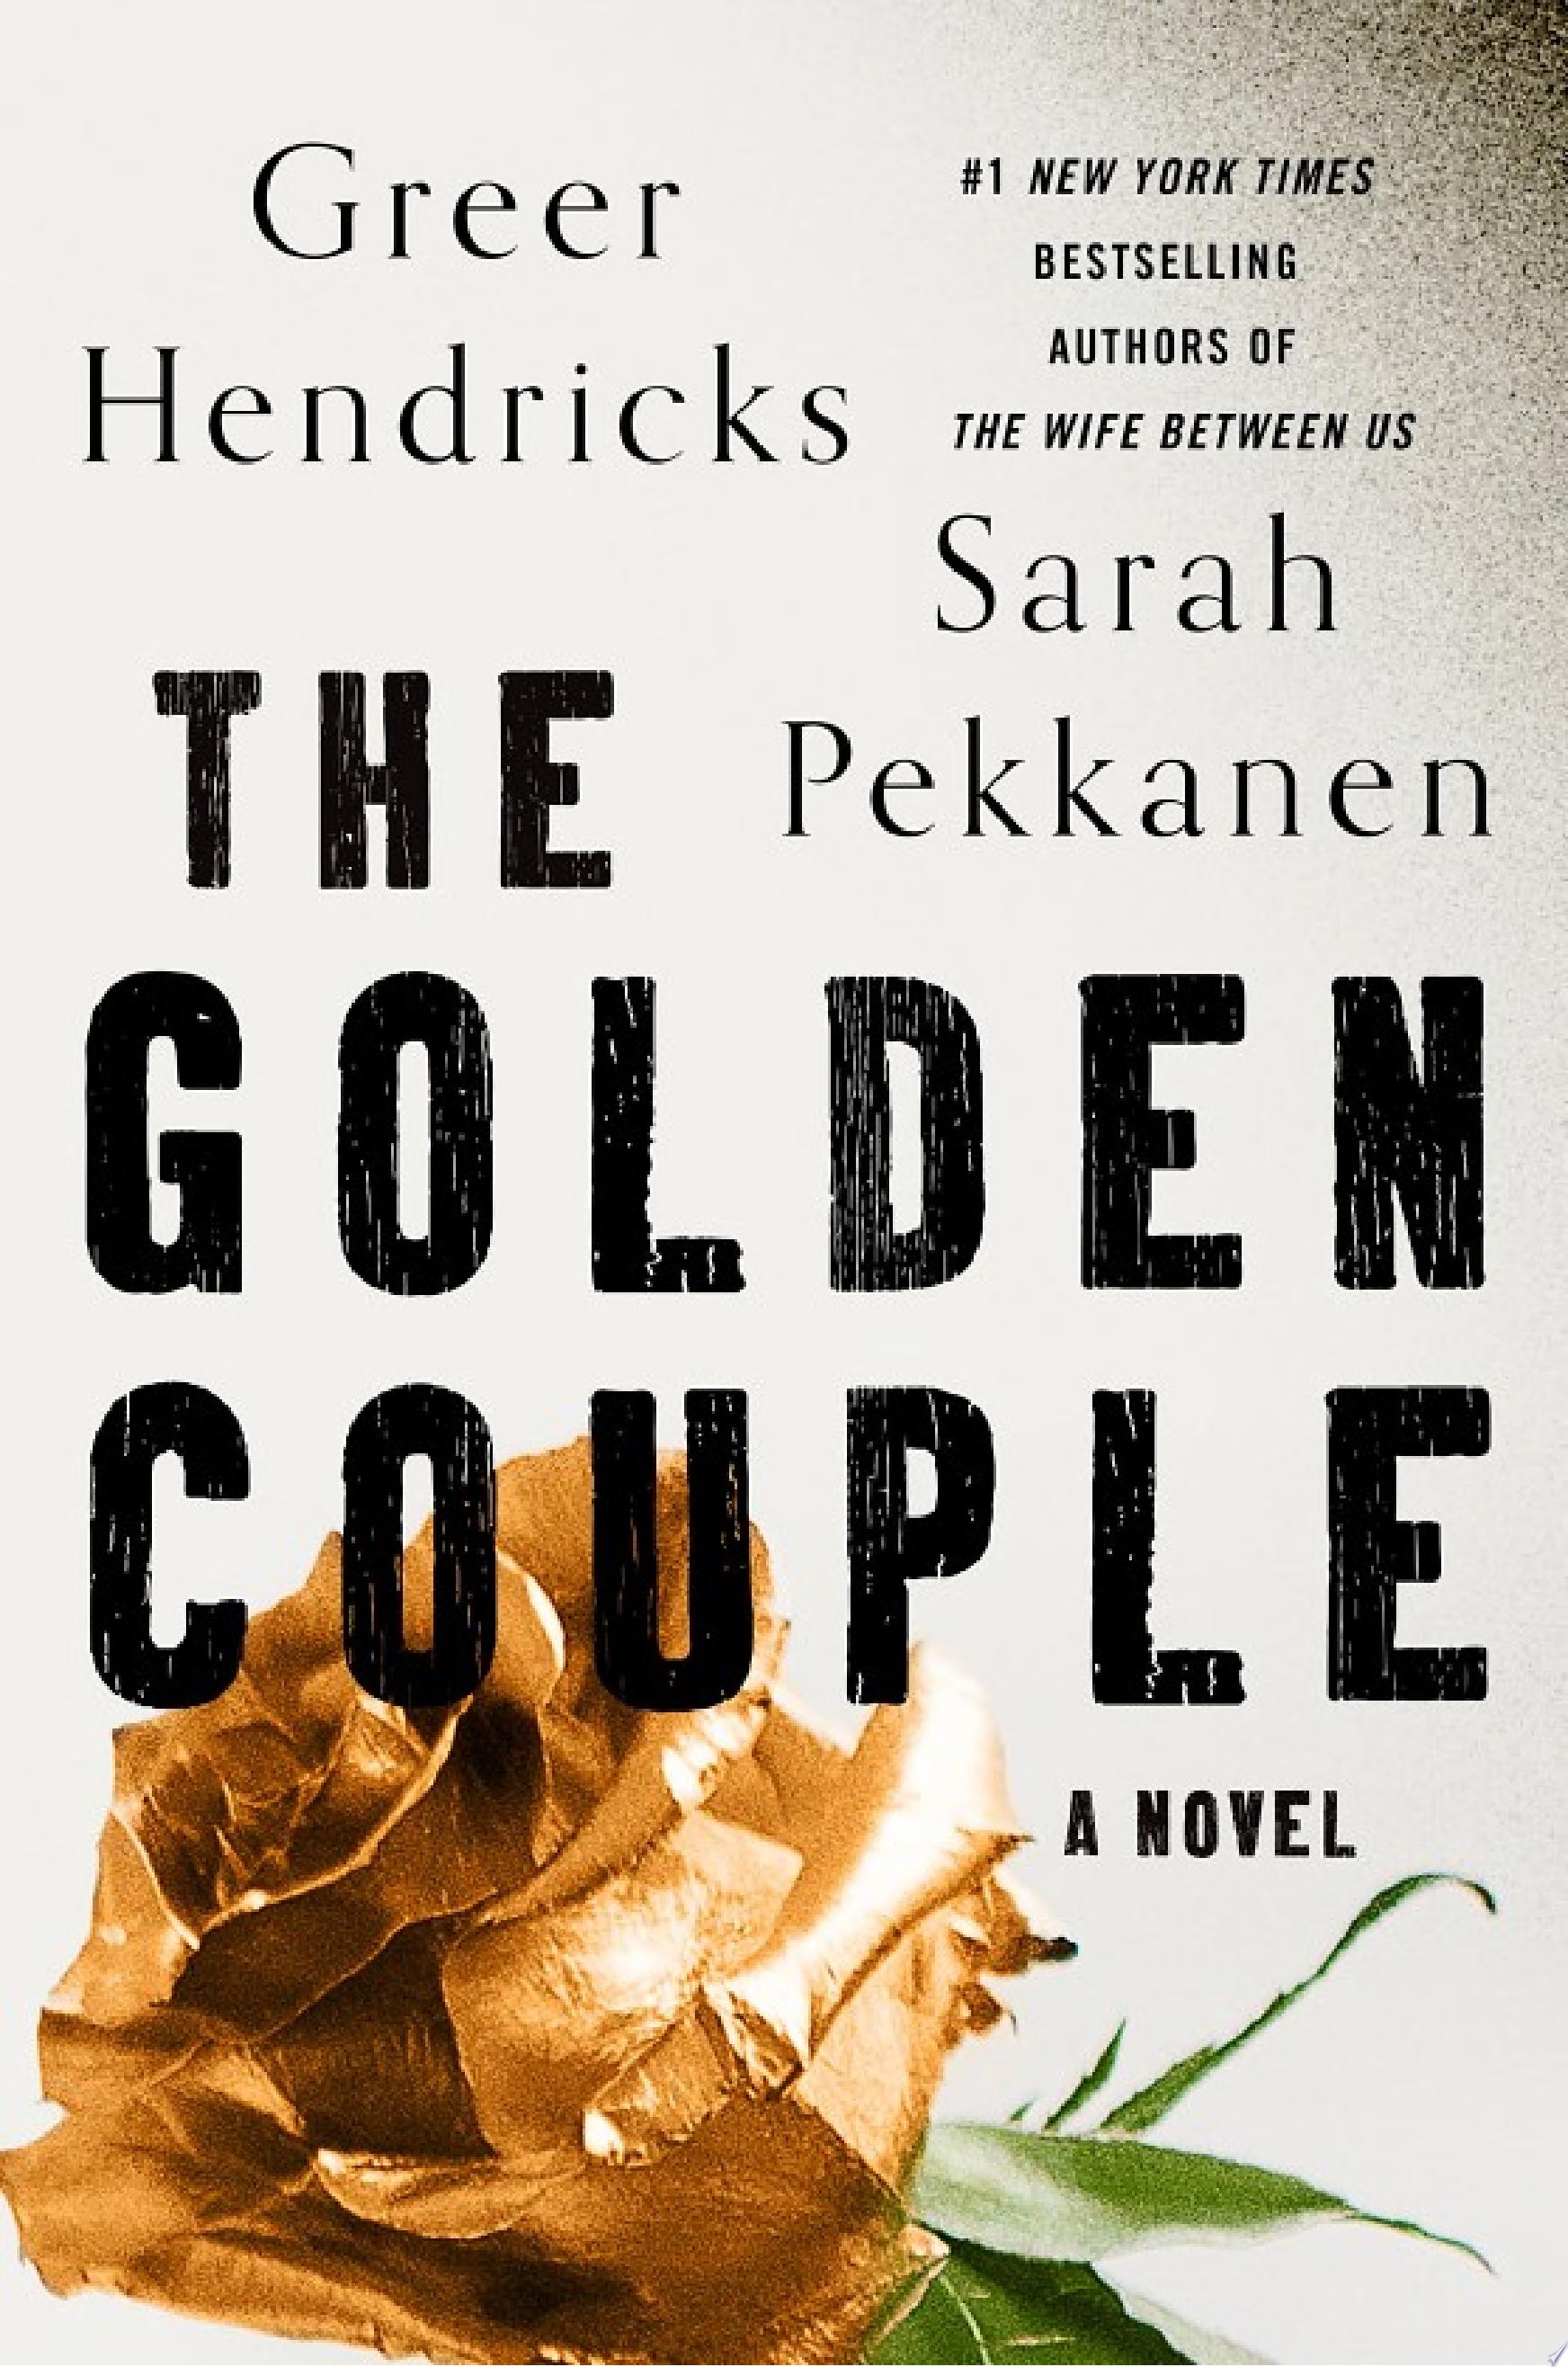 Image for "The Golden Couple"